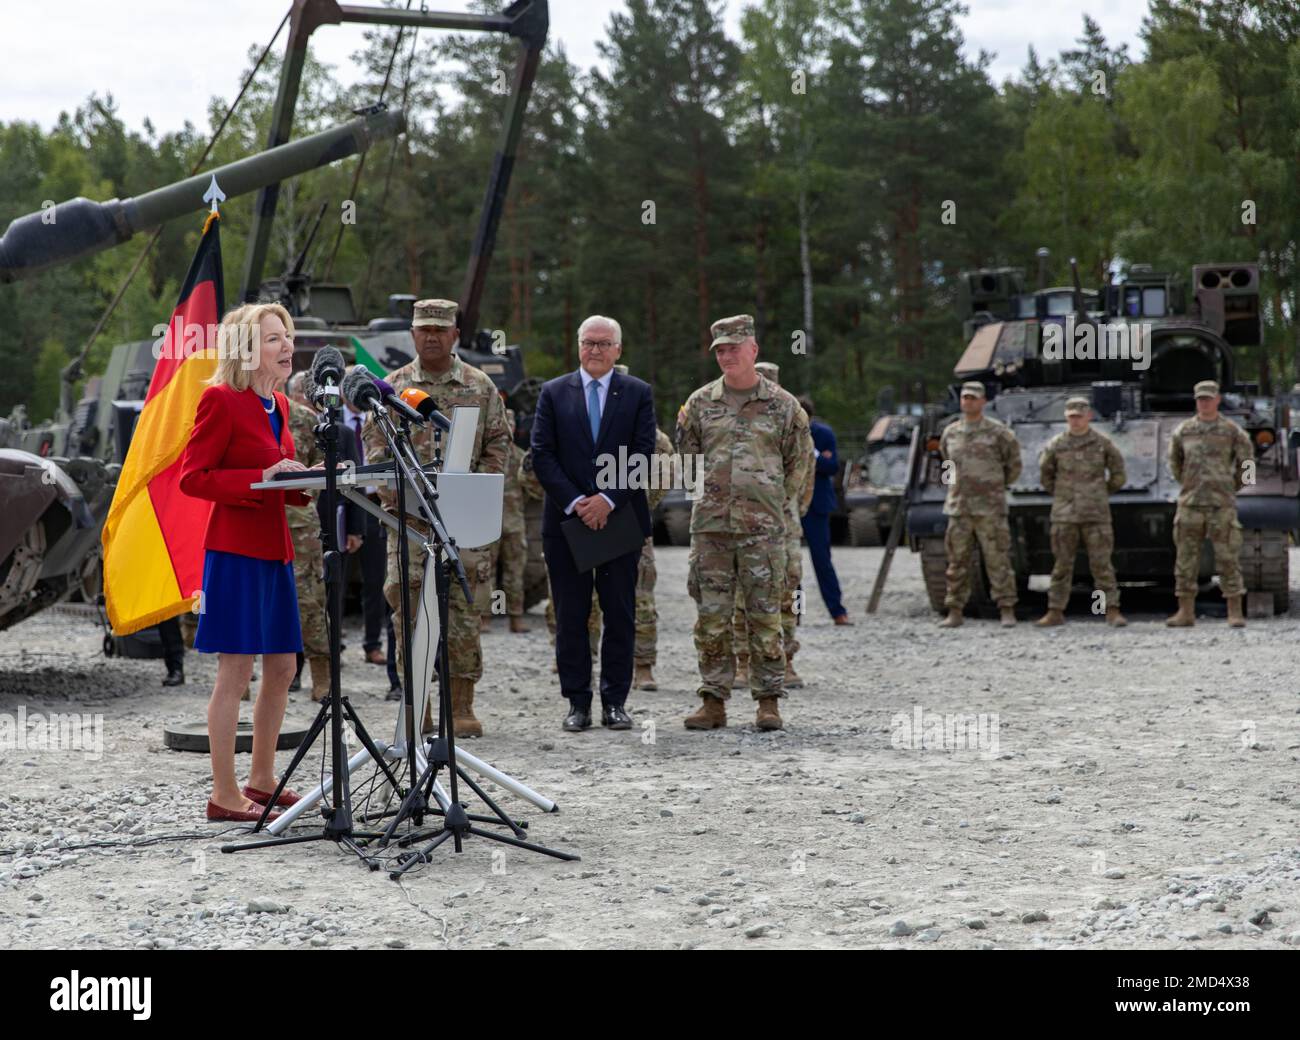 U.S. Ambassador to Germany, Dr. Amy Gutmann, addresses Soldiers of the 3rd Infantry Division's 1st Armor Brigade during her visit to 7th Army Training Command's Grafenwoehr Traiing Area, alongside German President Frank-Walter Steinmeier, July 13, 2022. Ambassador Gutmann traveled to 7 ATC to thank the troops for their contributions to the freedom and security of Germany, NATO, and the historic service they provide to the U.S. and its allies in the european theater. (Army photo by Sgt. Spencer Rhodes, 53rd Infantry Brigade Combat Team) Stock Photo